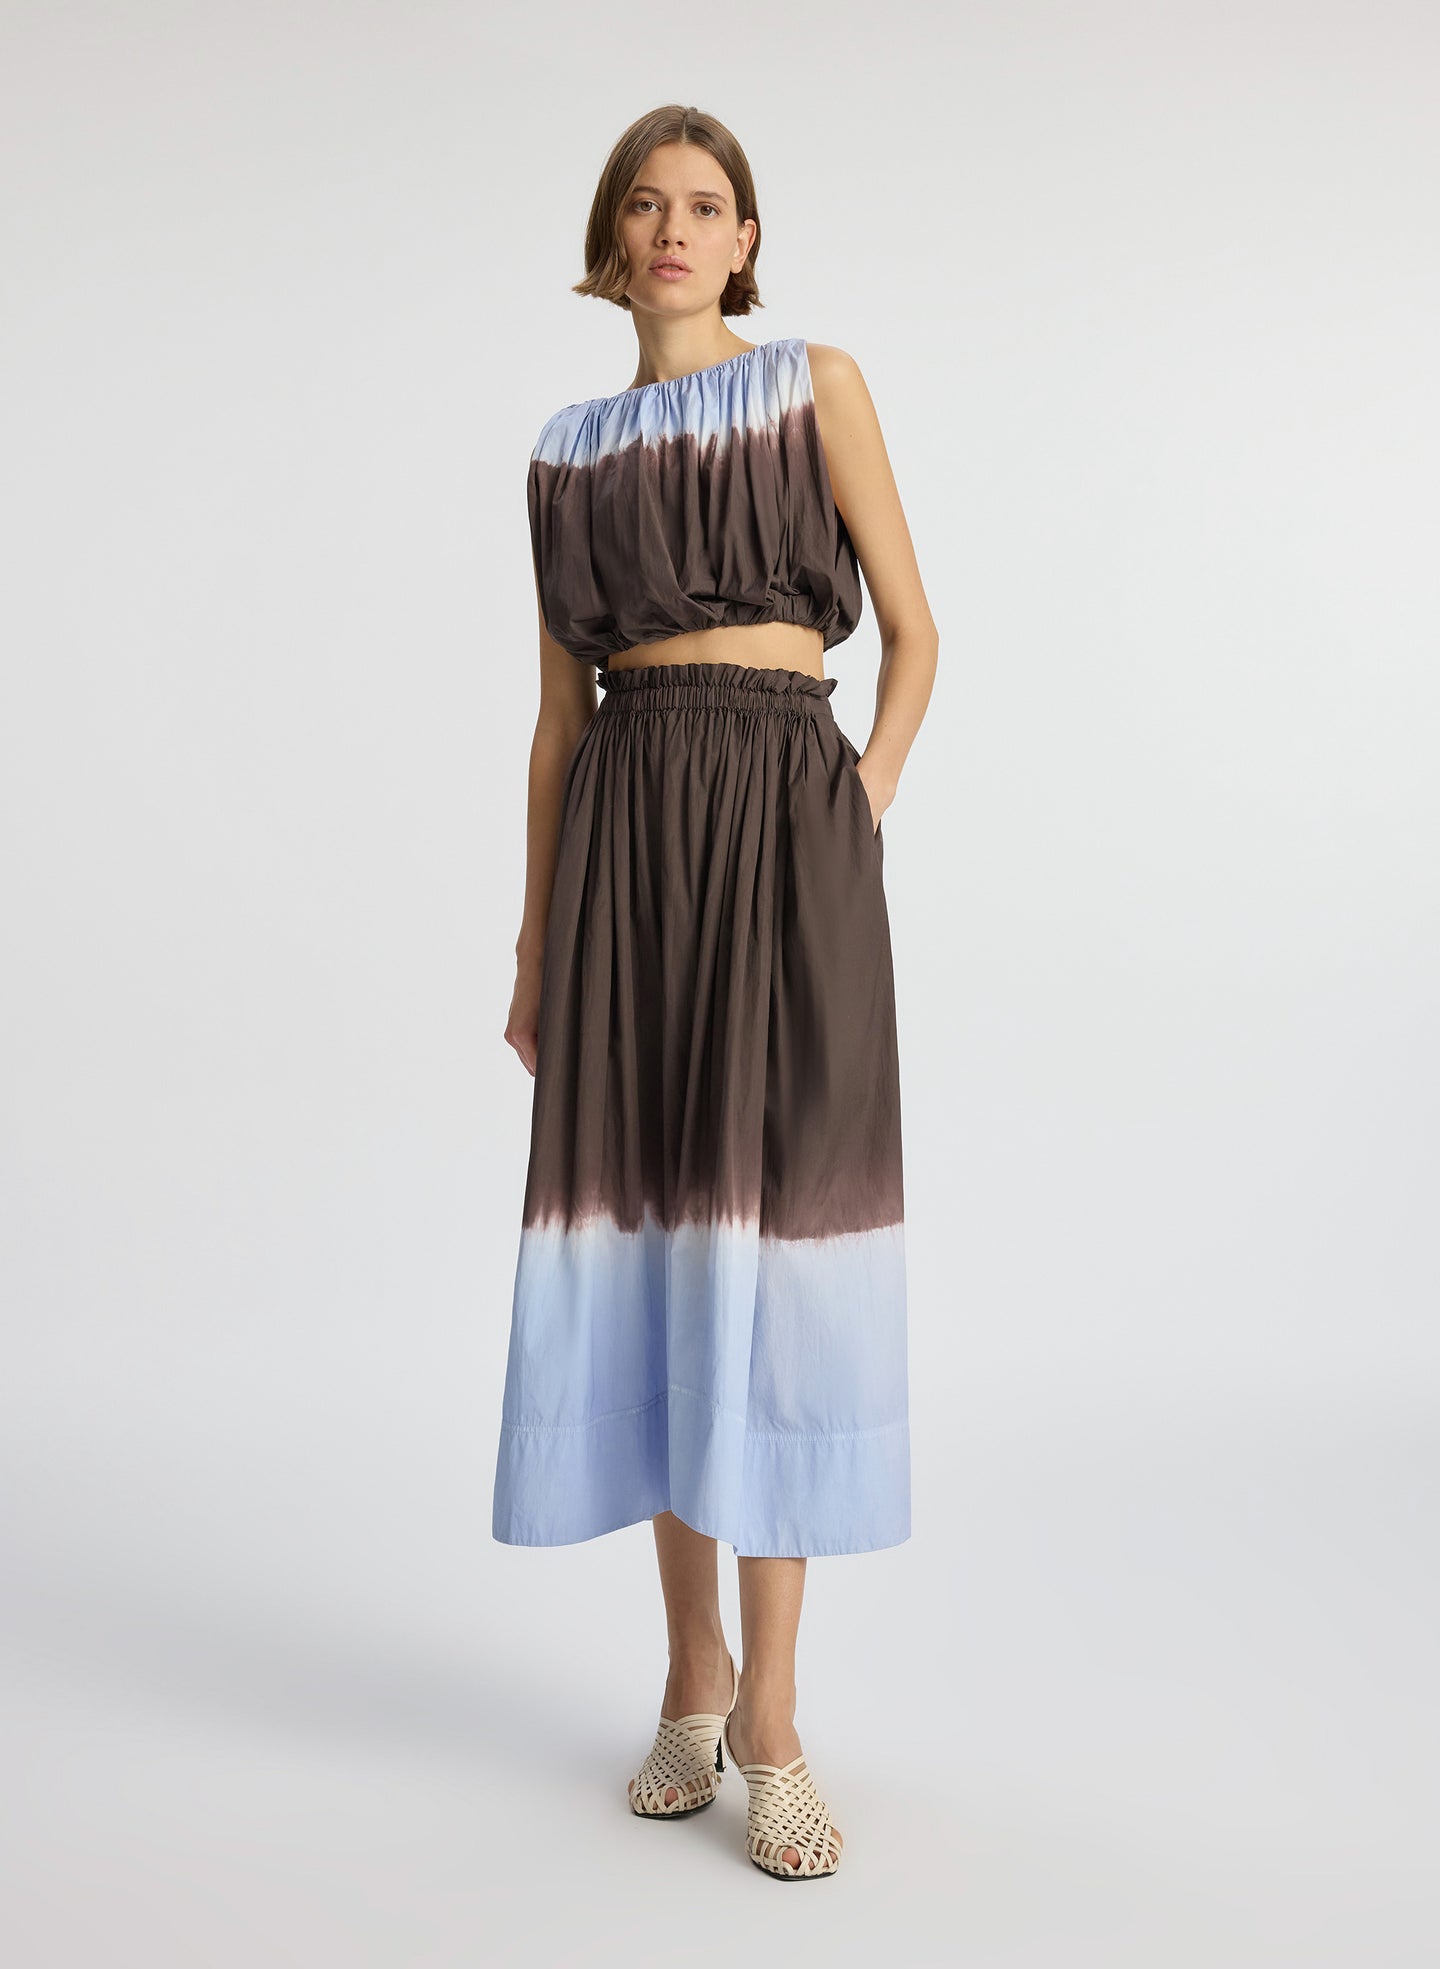 front view of woman wearing brown and light blue dip dye sleeveless top and matching midi skirt